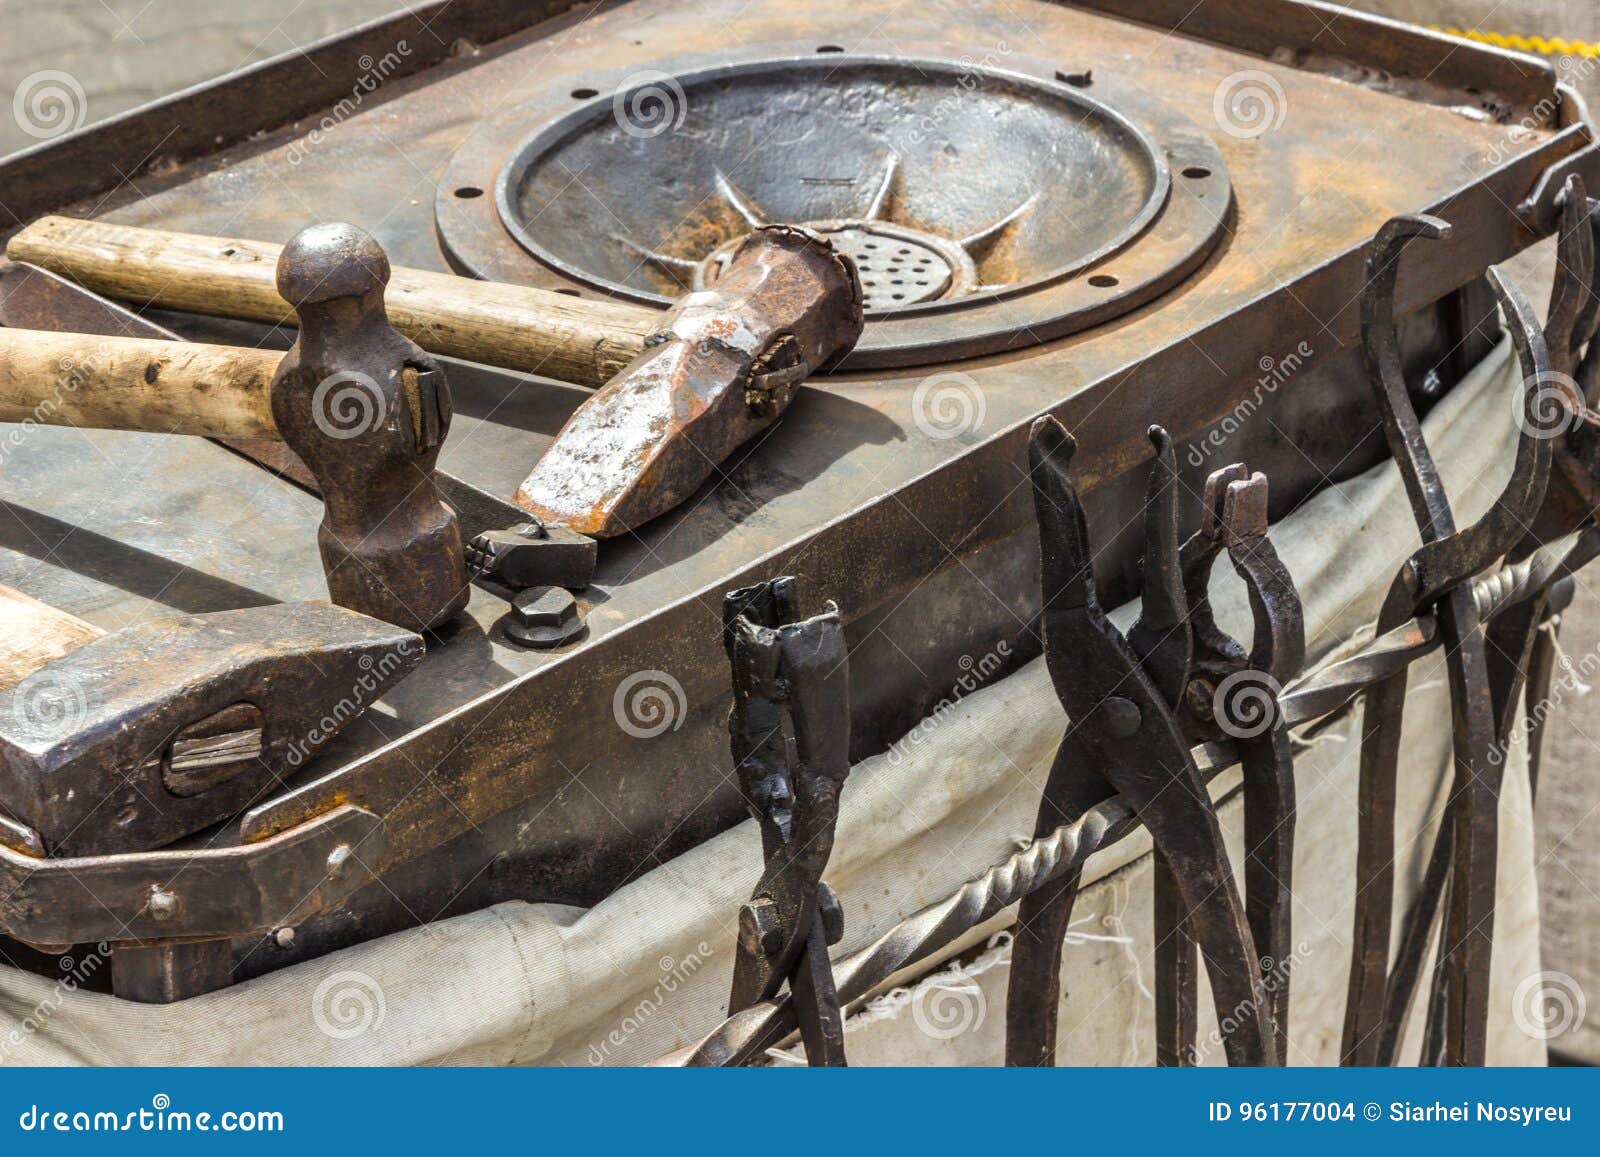 tools: hammer, tongs. equipment for coinage